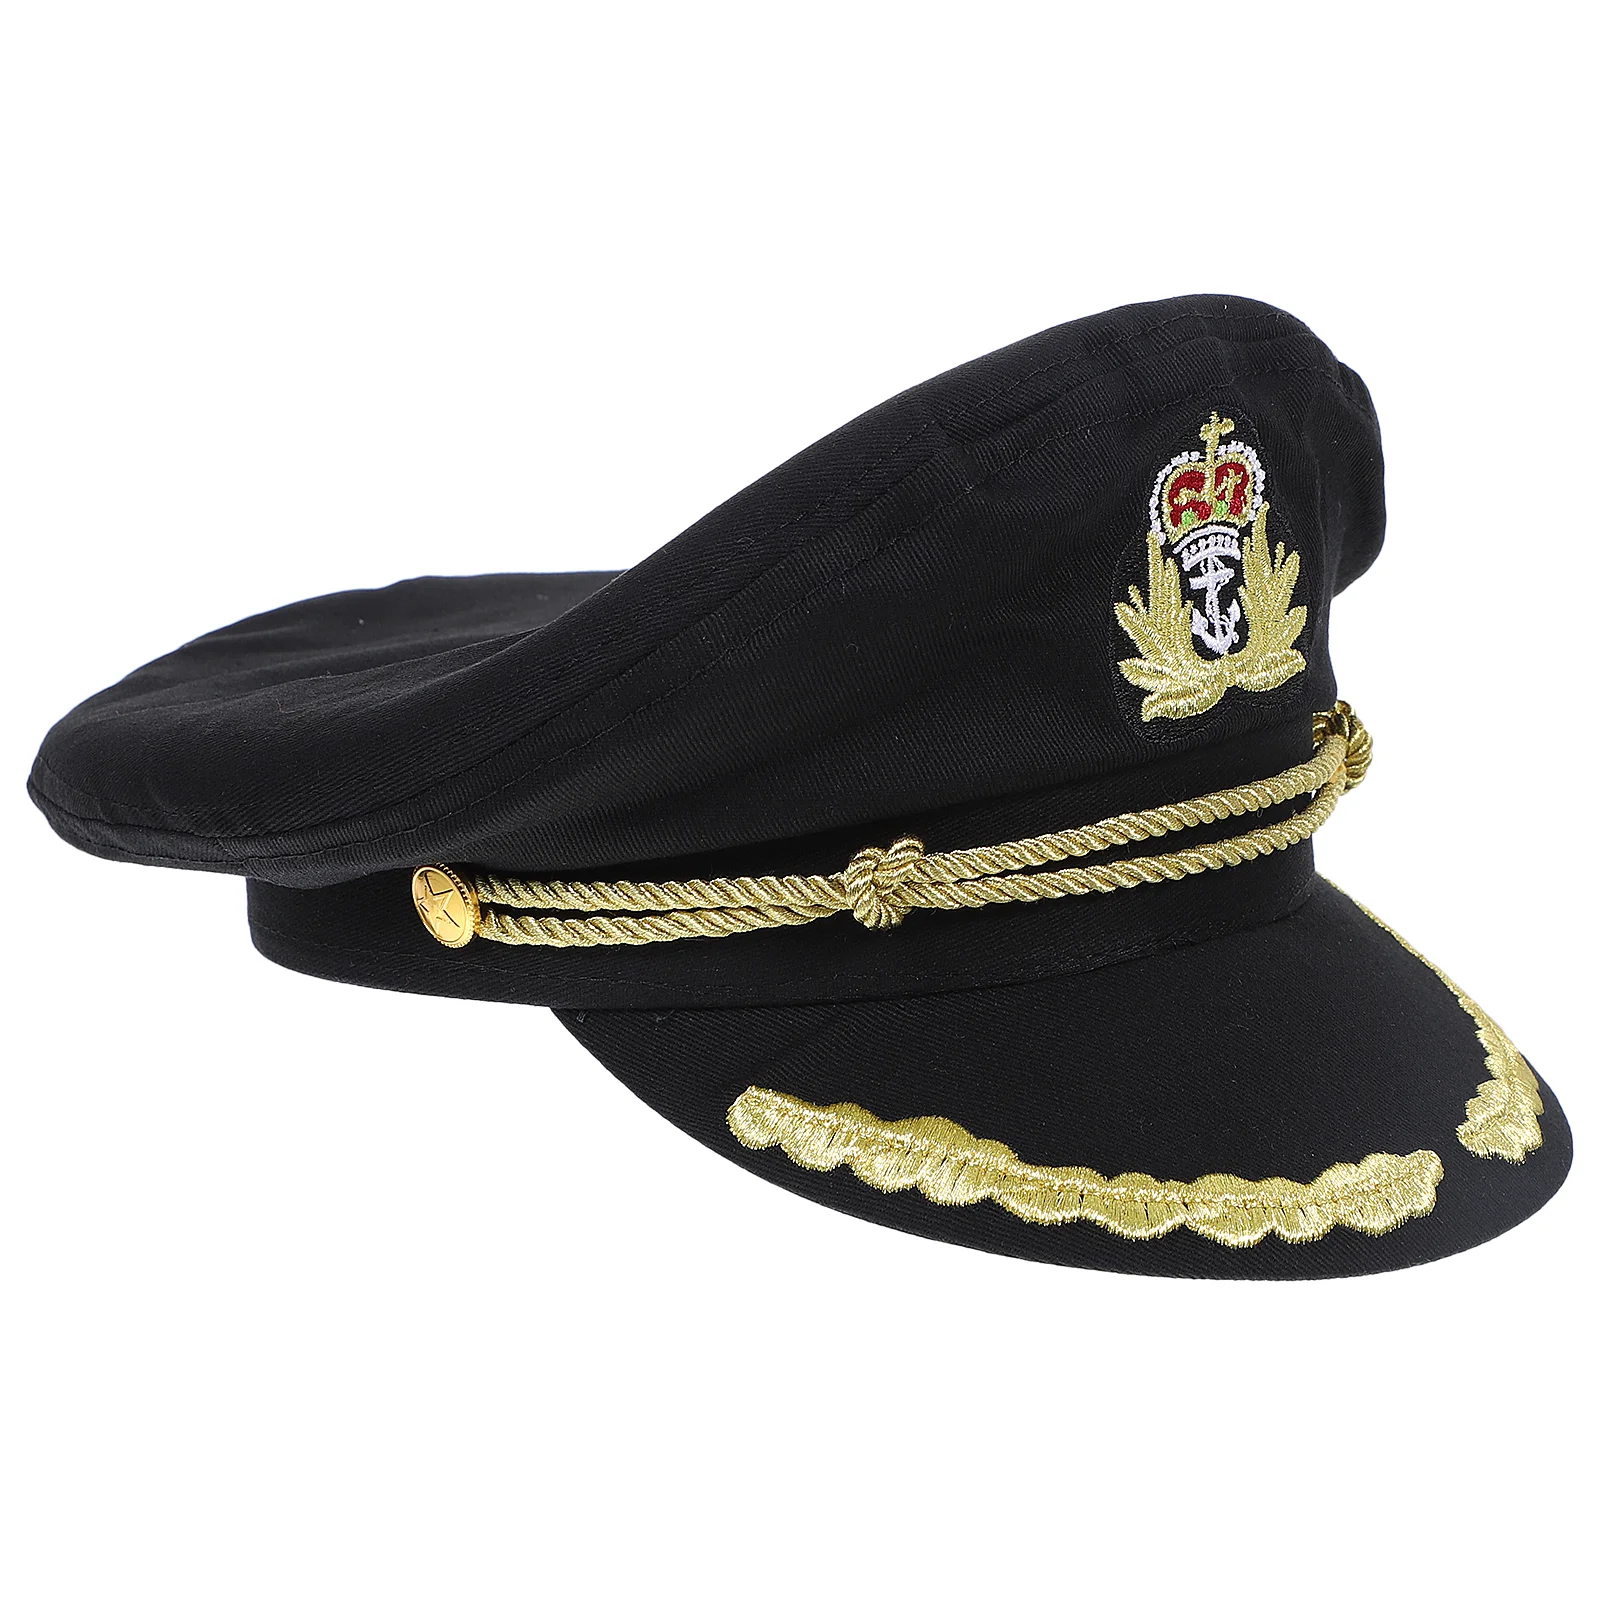 

Hat Captain Hats Sailor Boat Costumecaptains Boating Mennavy Marine Admiral Yacht Cap Accessories Ship Gifts Party Sailing Sea